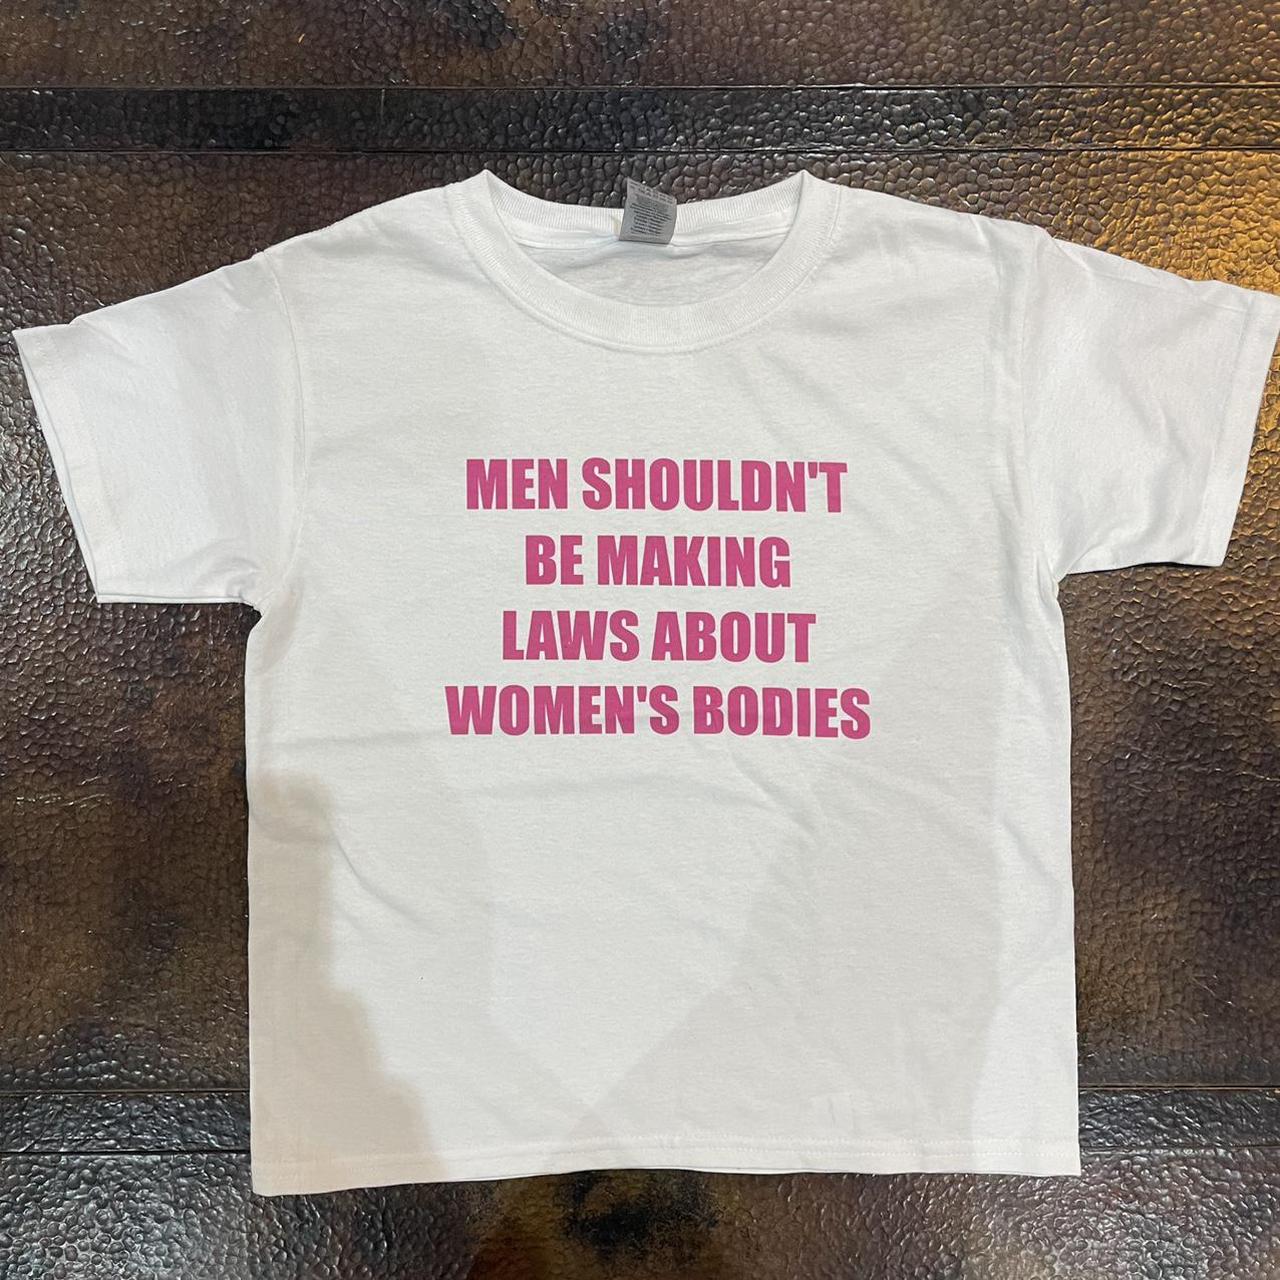 MEN SHOULDN’T BE MAKING LAWS ABOUT WOMENS BODIES.... - Depop